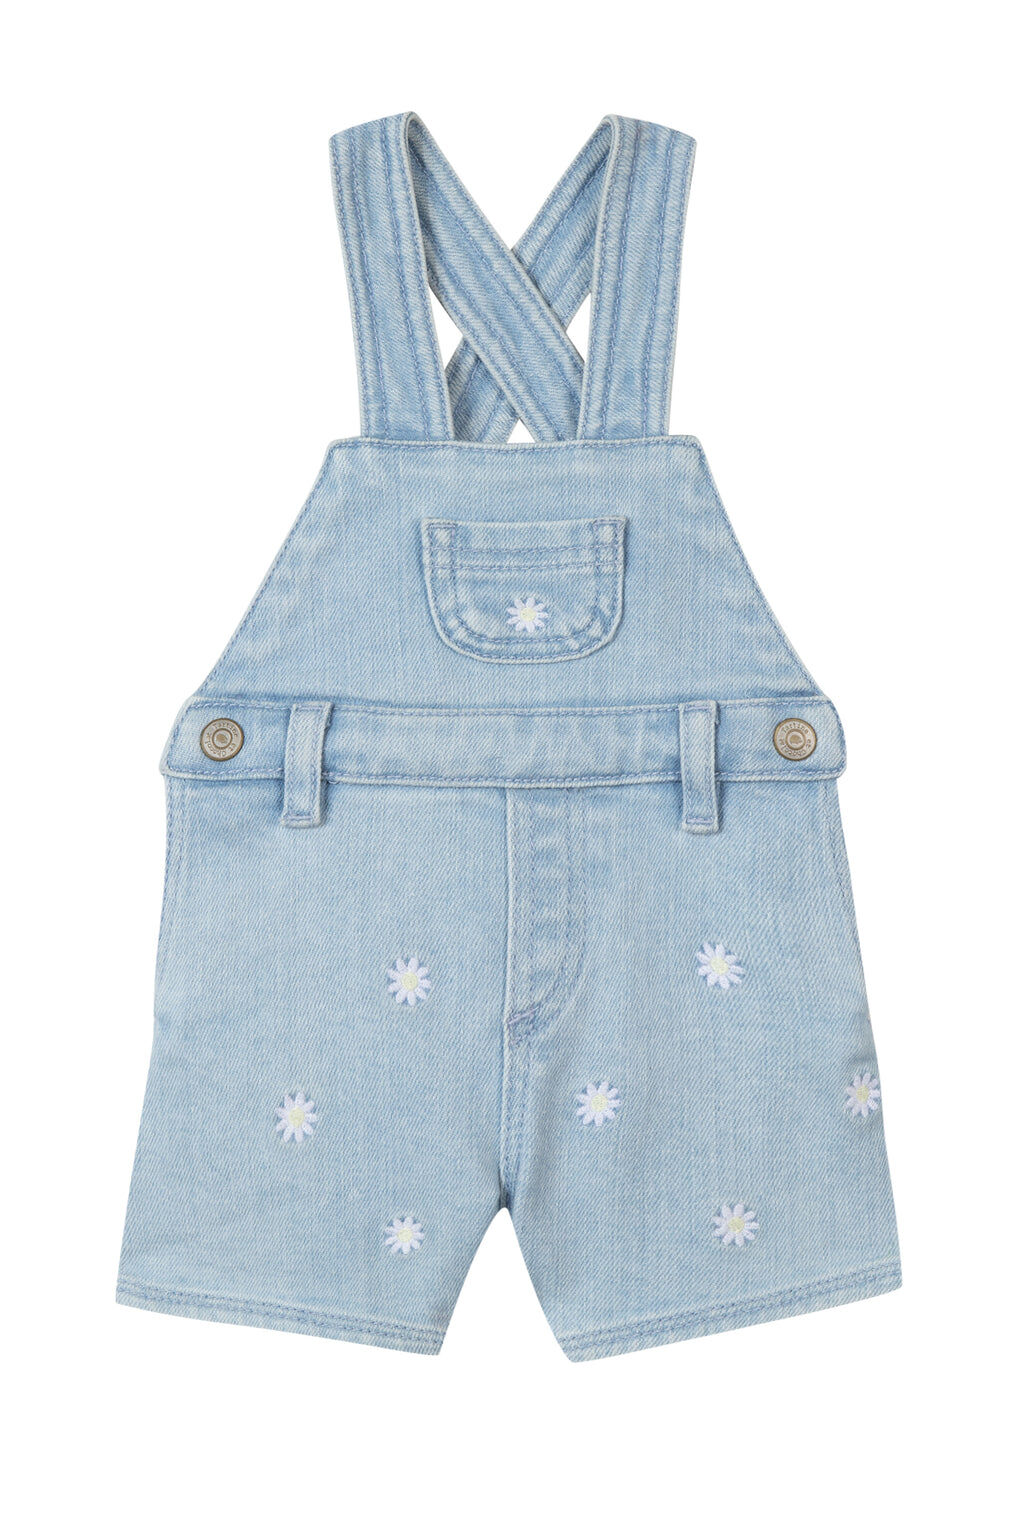 dungaree - Blue daisy embroidery